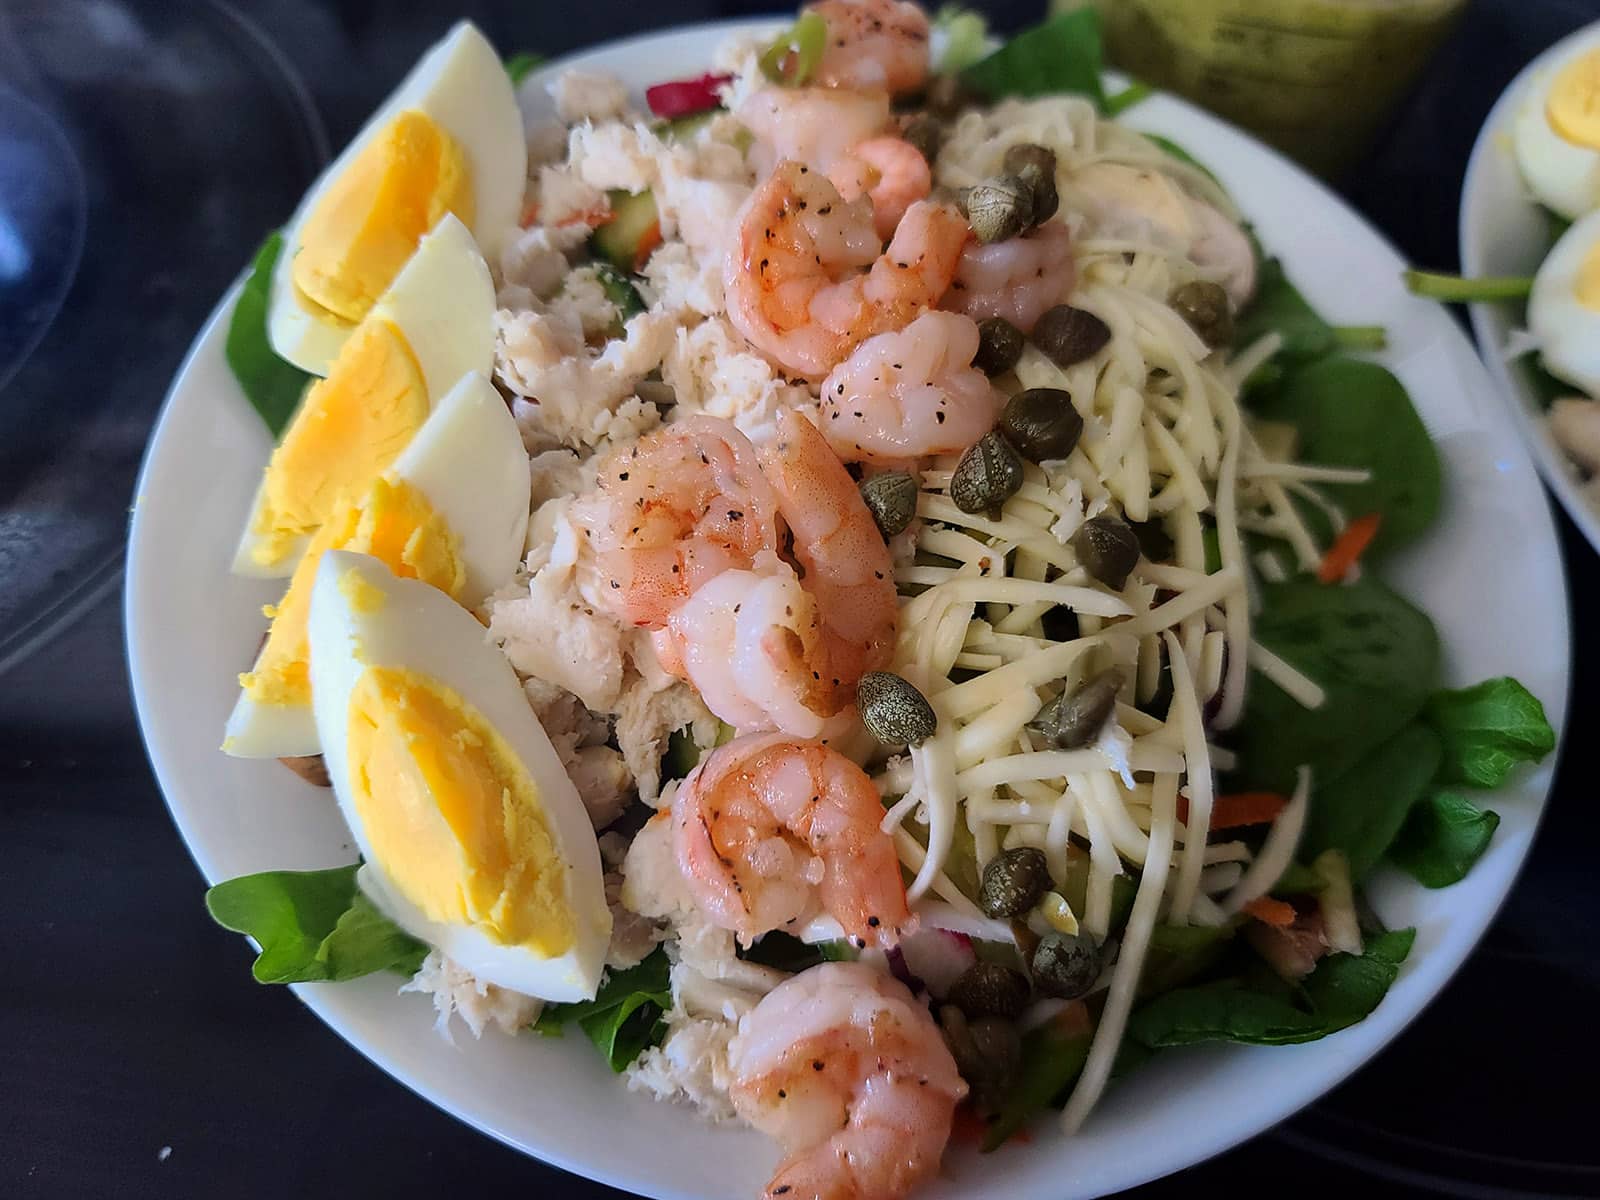 A bowl of seafood cobb salad with shrimp, canned crab, and boiled eggs on it.